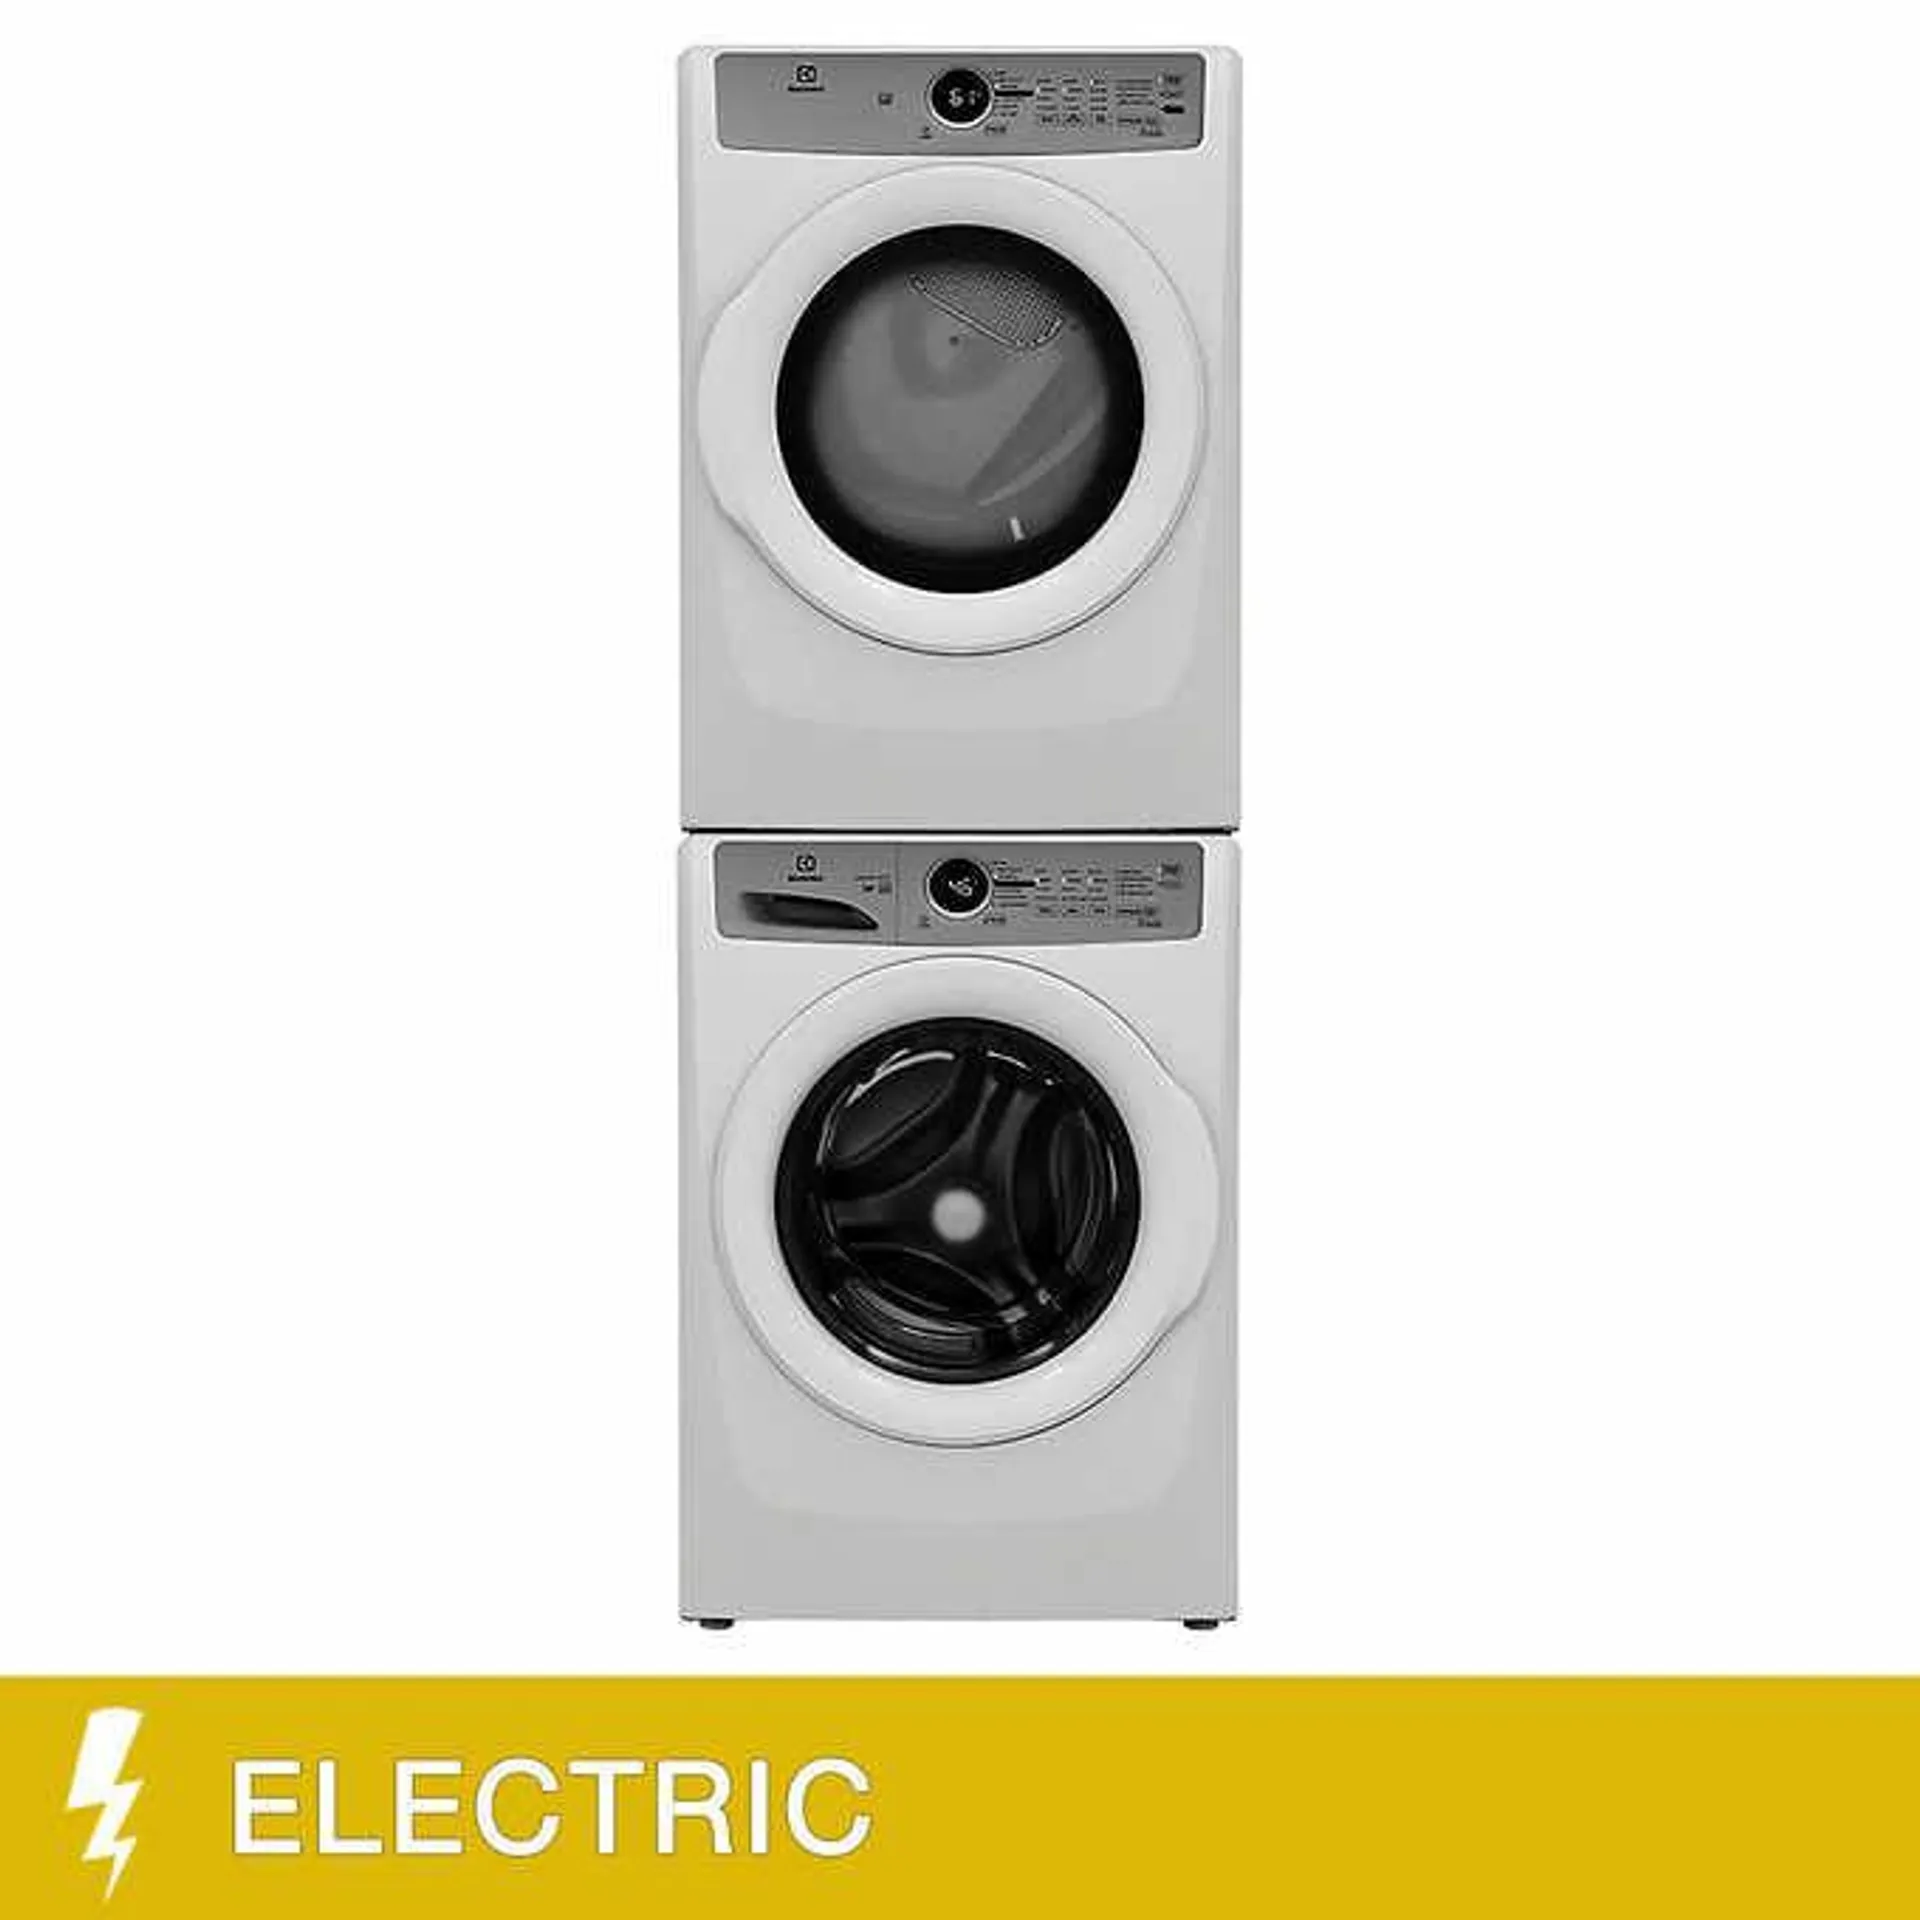 Electrolux 3 Series 3-piece White Front Load Laundry Suite with 5.1 cu. ft. Washer, 8.0 cu. ft. Dryer with Stacking Kit